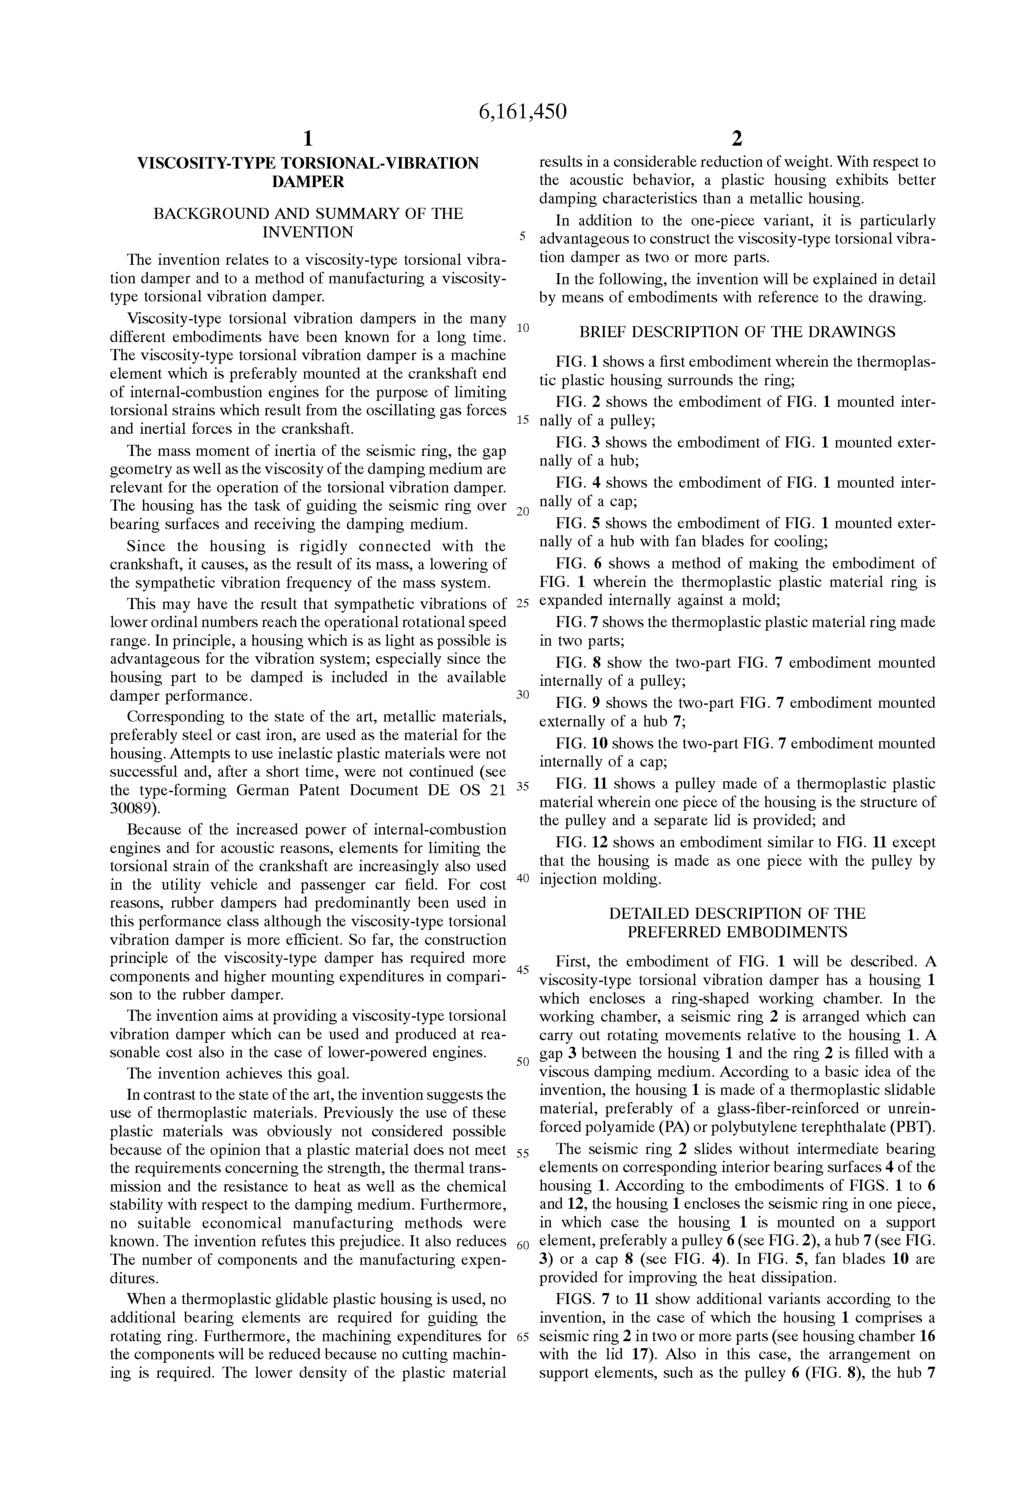 1 VISCOSITY-TYPE TORSIOAL-VIIBRATIO DAMPER BACKGROUD AD SUMMARY OF THE IVETIO The invention relates to a Viscosity-type torsional vibra tion damper and to a method of manufacturing a Viscosity type